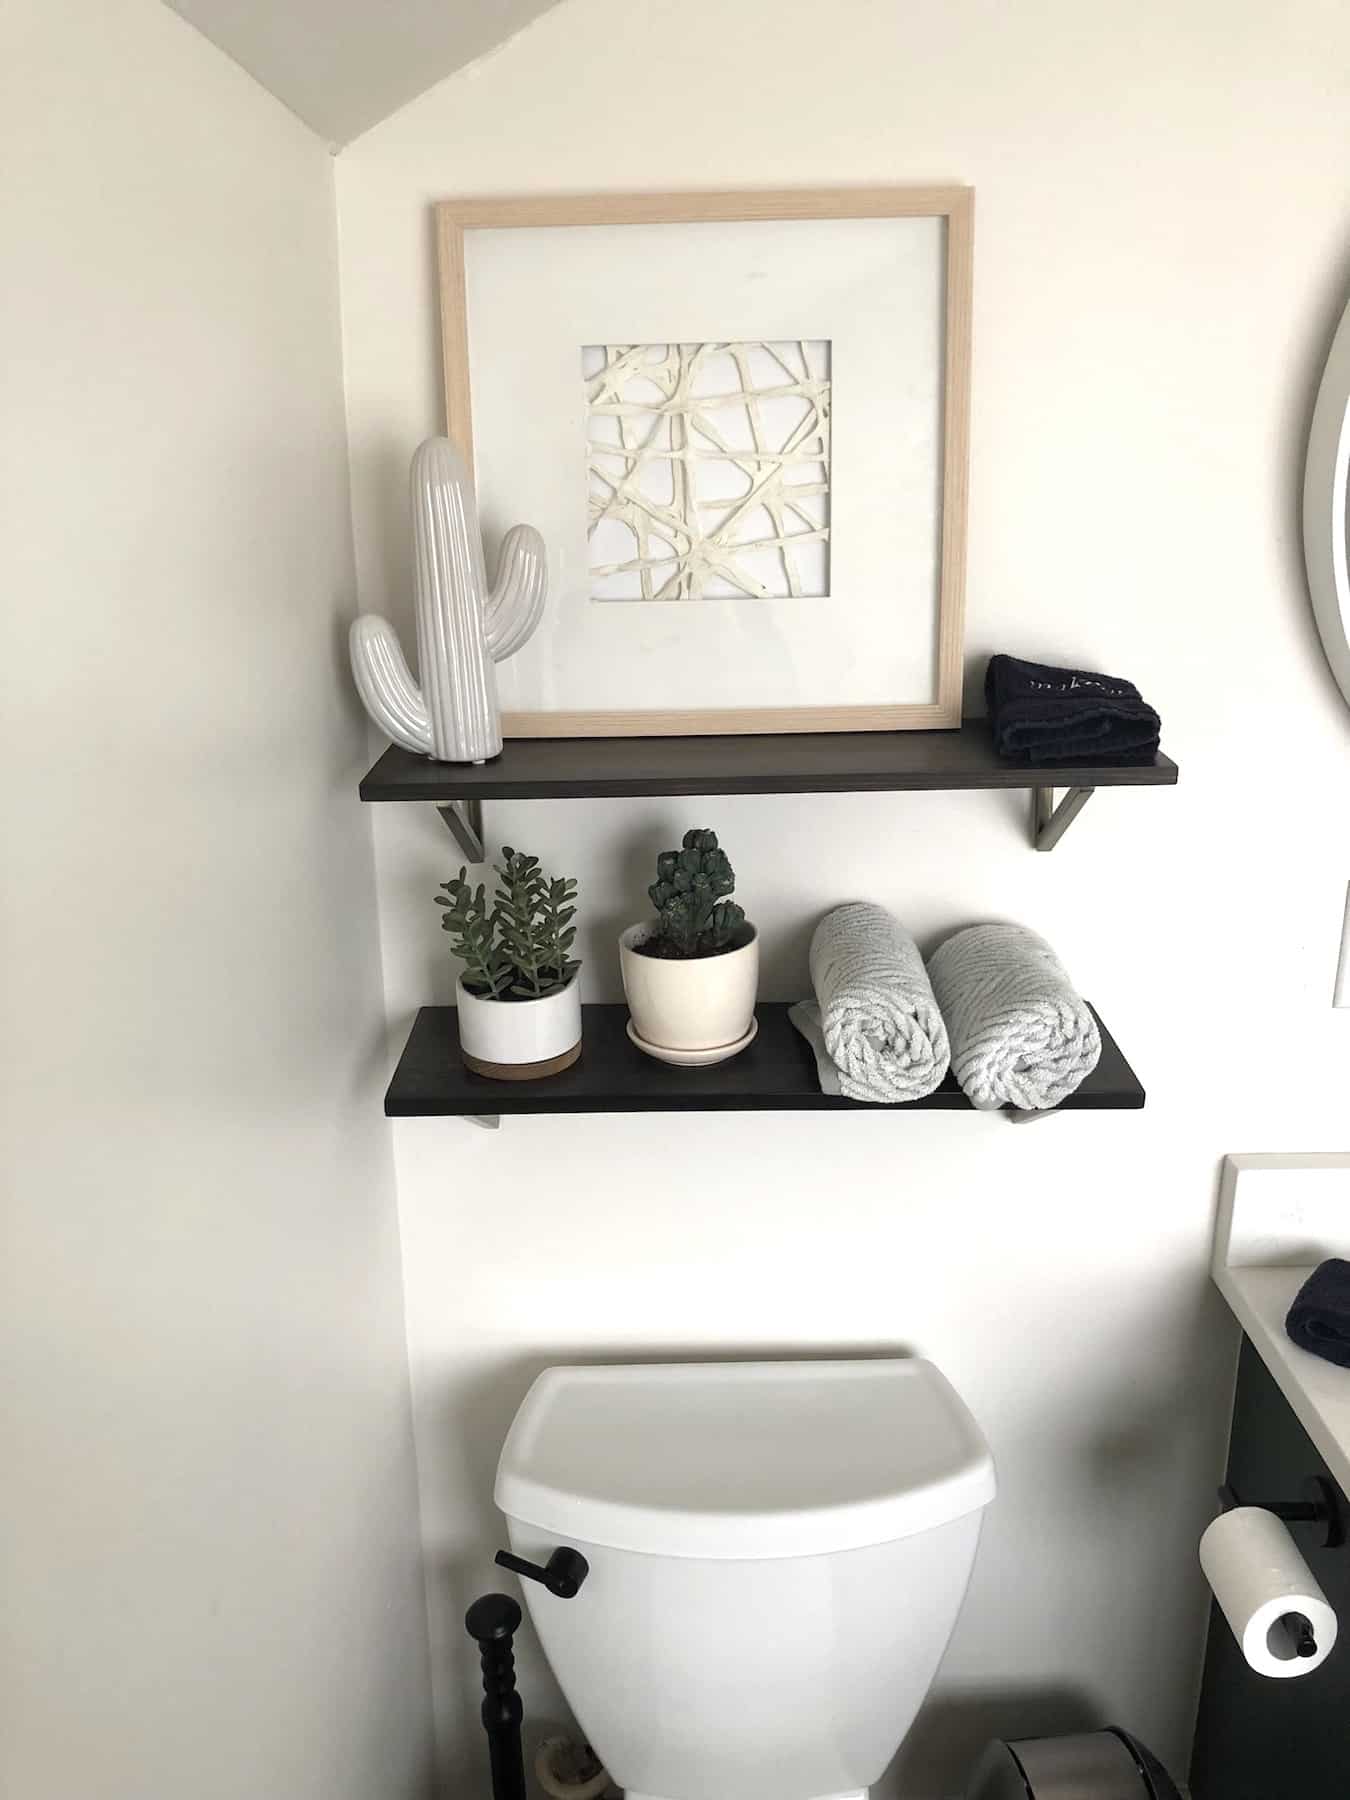 18 Tricky Small Bathroom Storage Ideas To Make A Cool Space